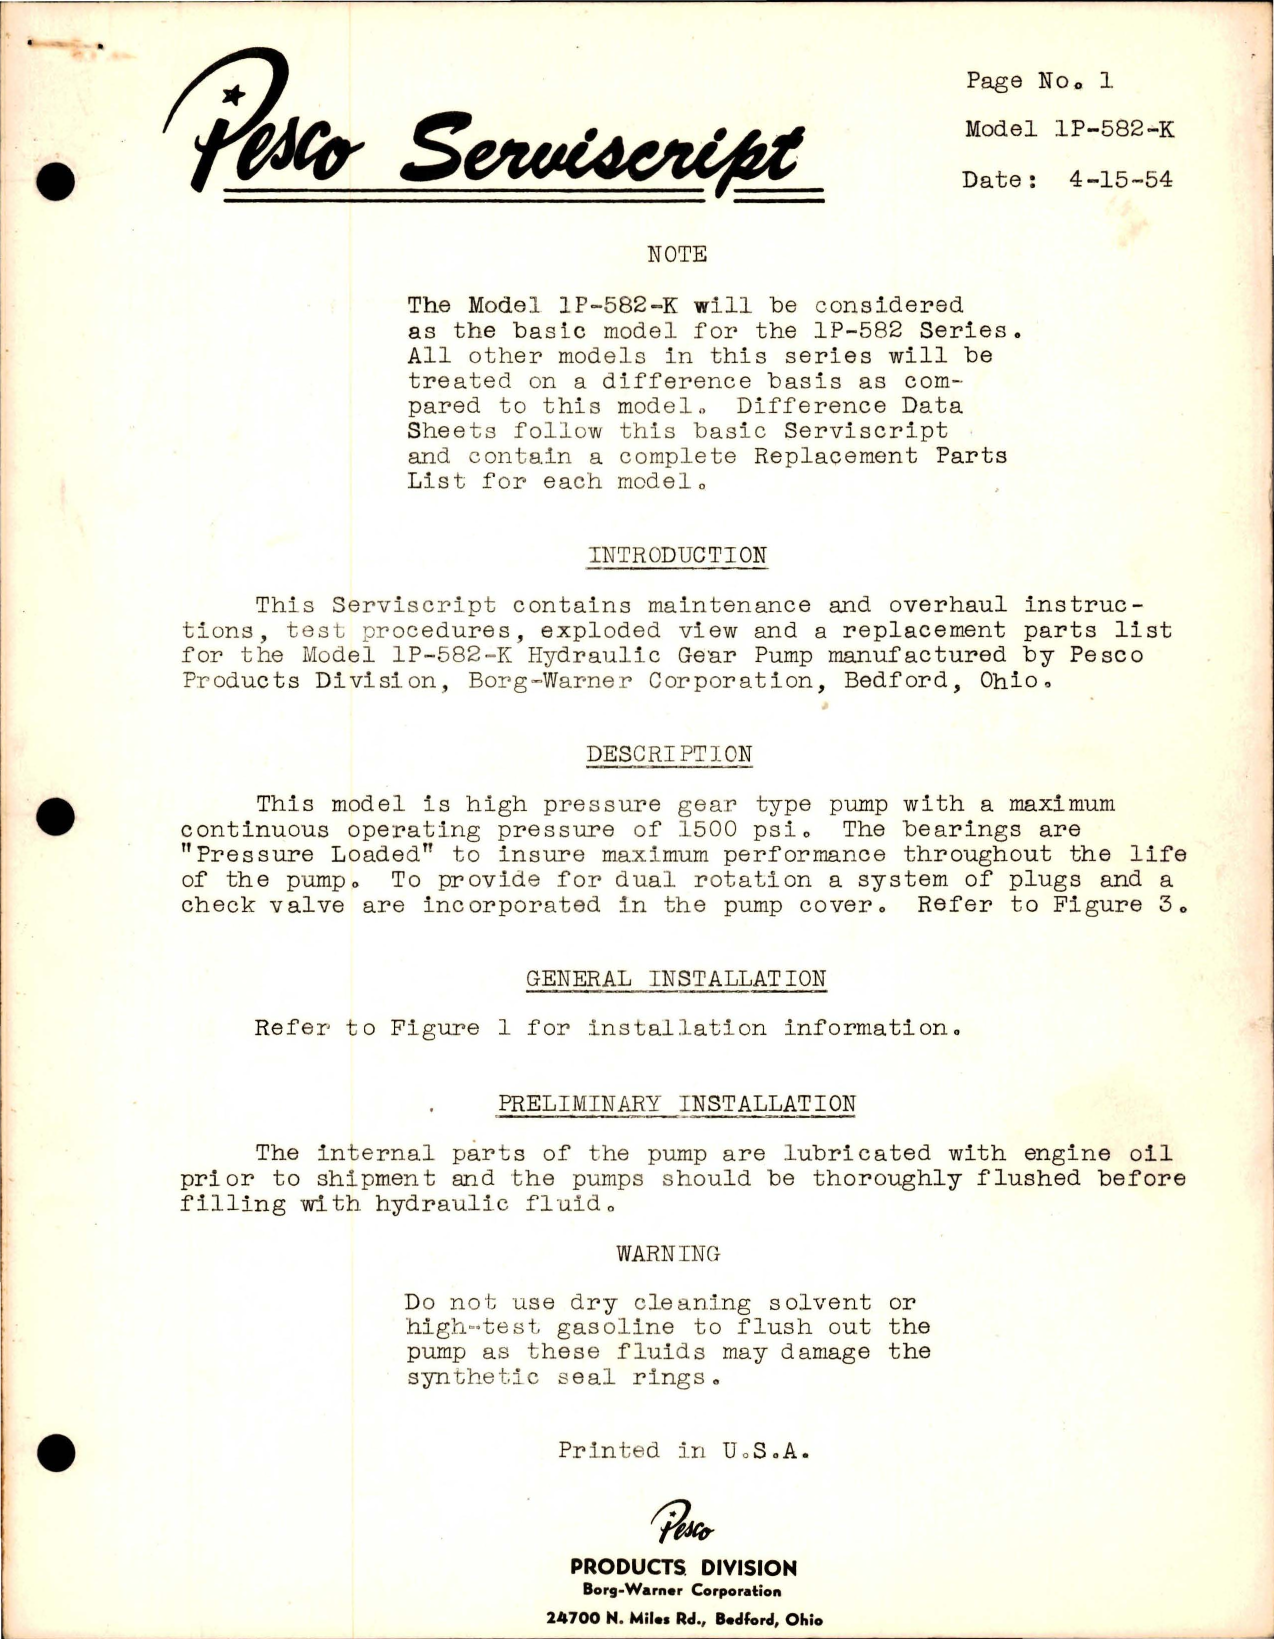 Sample page 1 from AirCorps Library document: Maintenance, Overhaul Instructions, and Test Procedures with Parts List for Hydraulic Gear Pump - Model 1P-582-K 